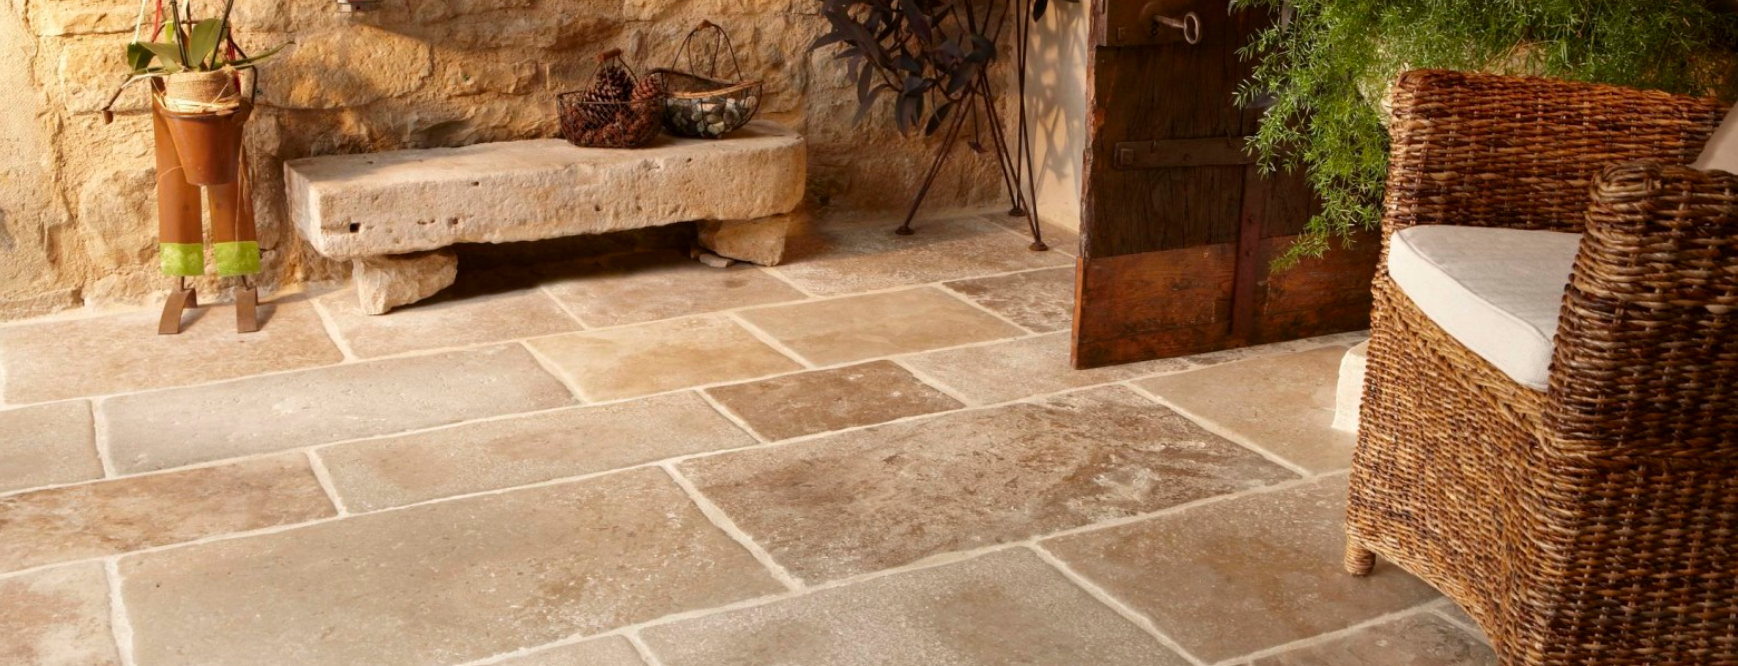 Rustic outdoor living space with large, natural stone tile flooring